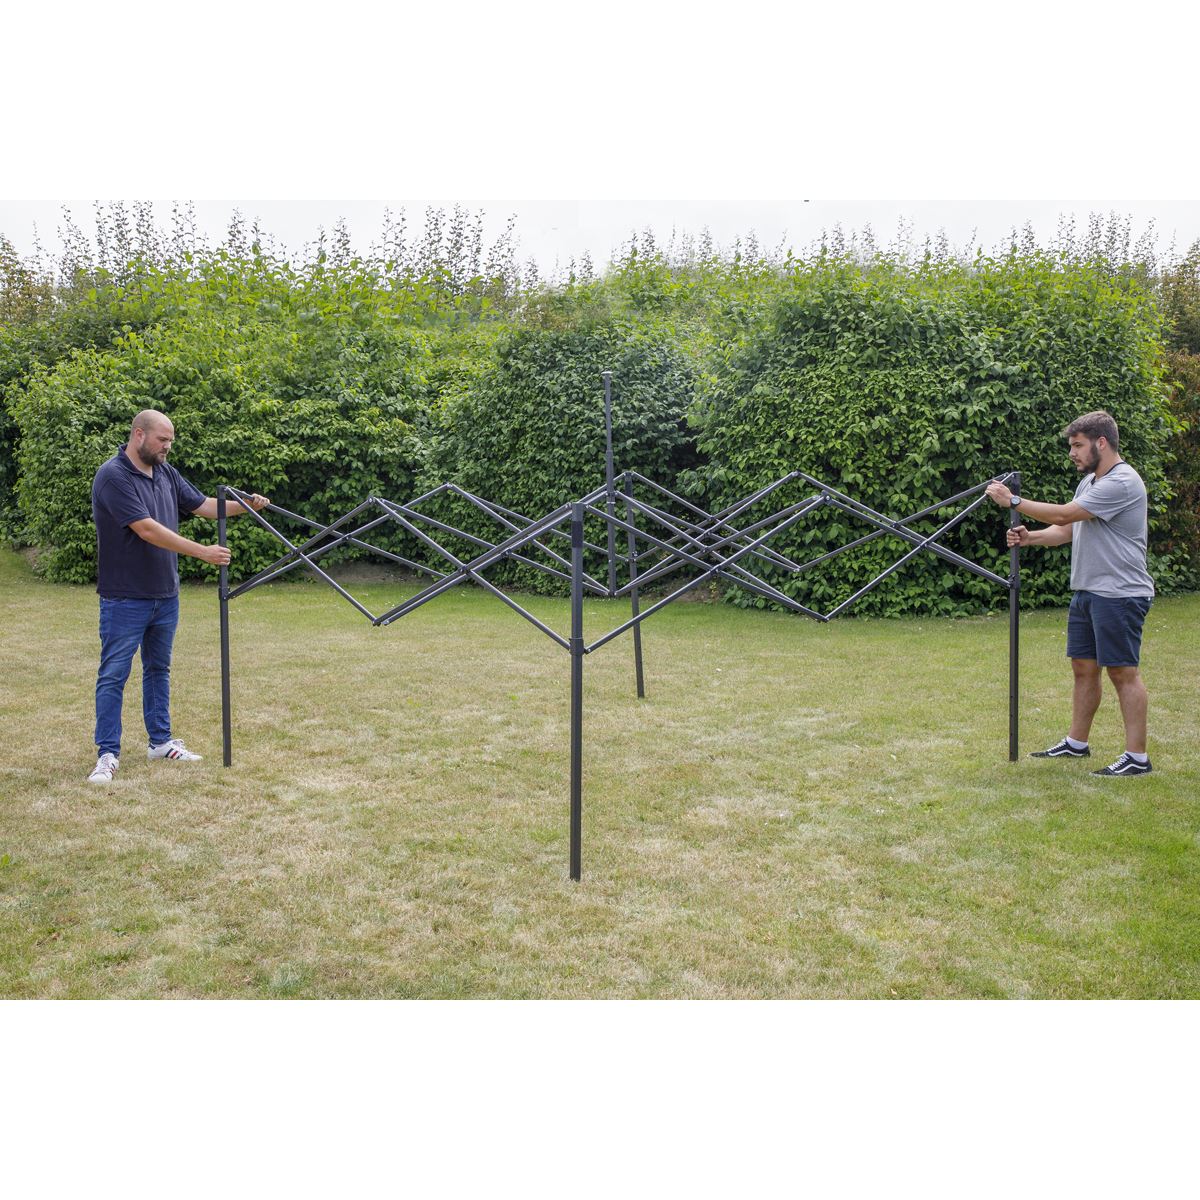 Dellonda Premium 3 x 3m Pop-Up Gazebo, PVC Coated, Water Resistant Fabric, Supplied with Carry Bag, Rope, Stakes & Weight Bags - Dark Green Canopy